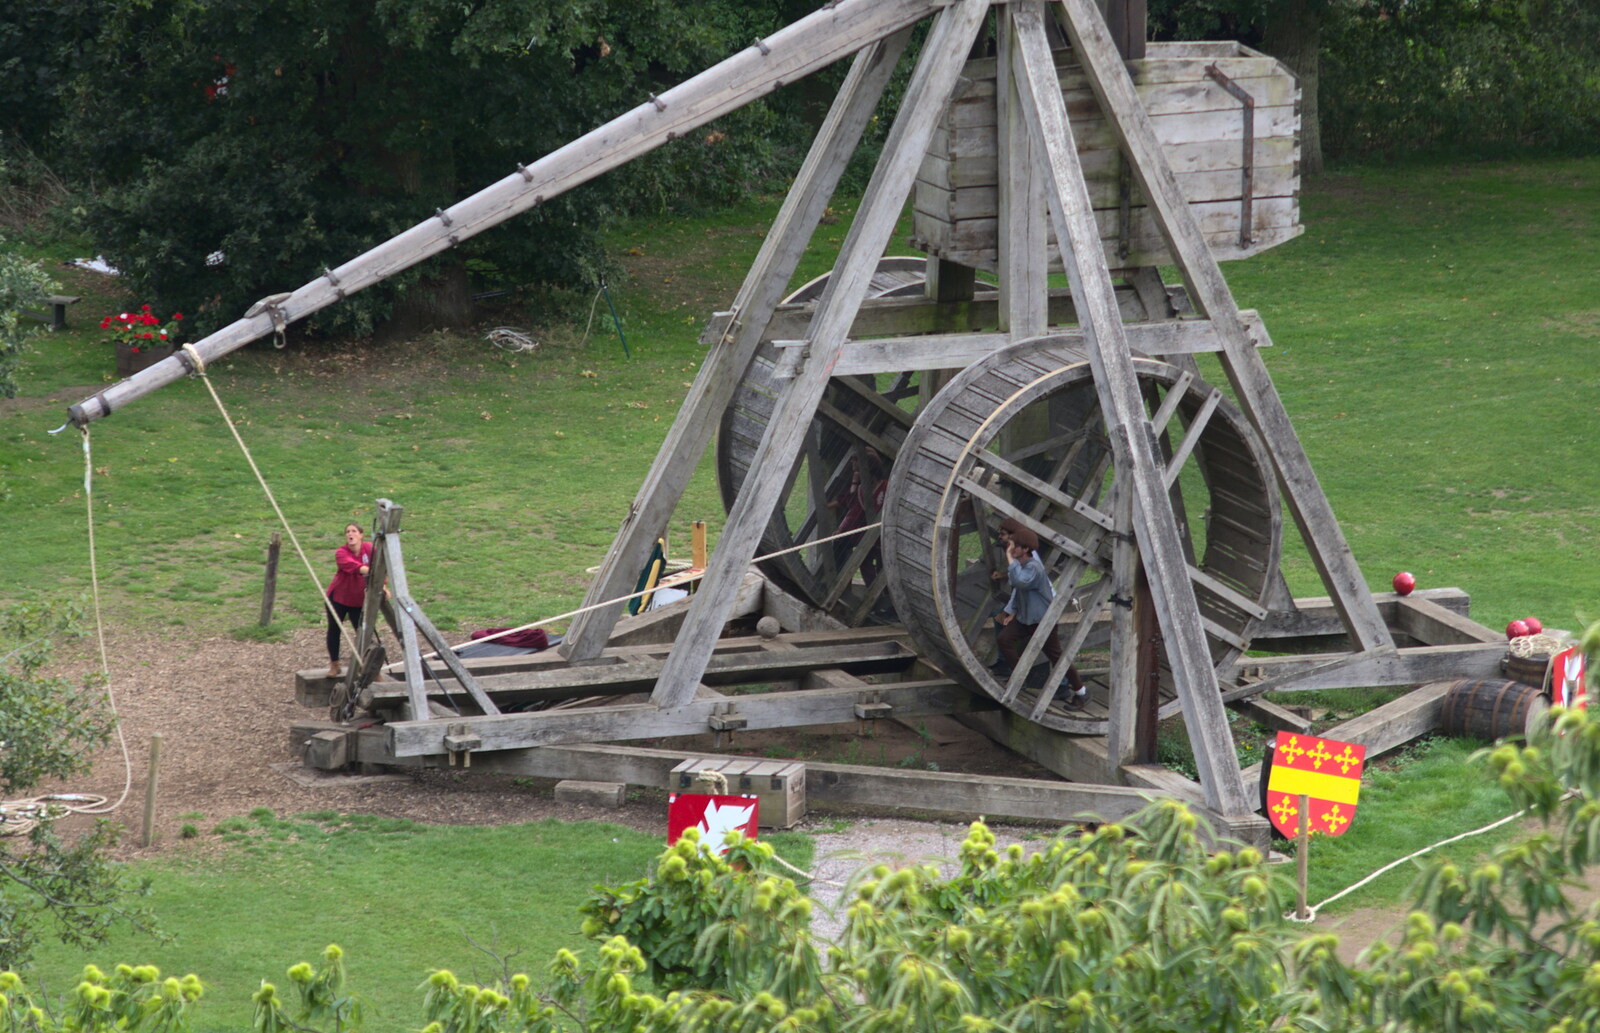 The trebuchet is wound up by human hamsters from A Day at Warwick Castle, Warwickshire - 8th September 2018